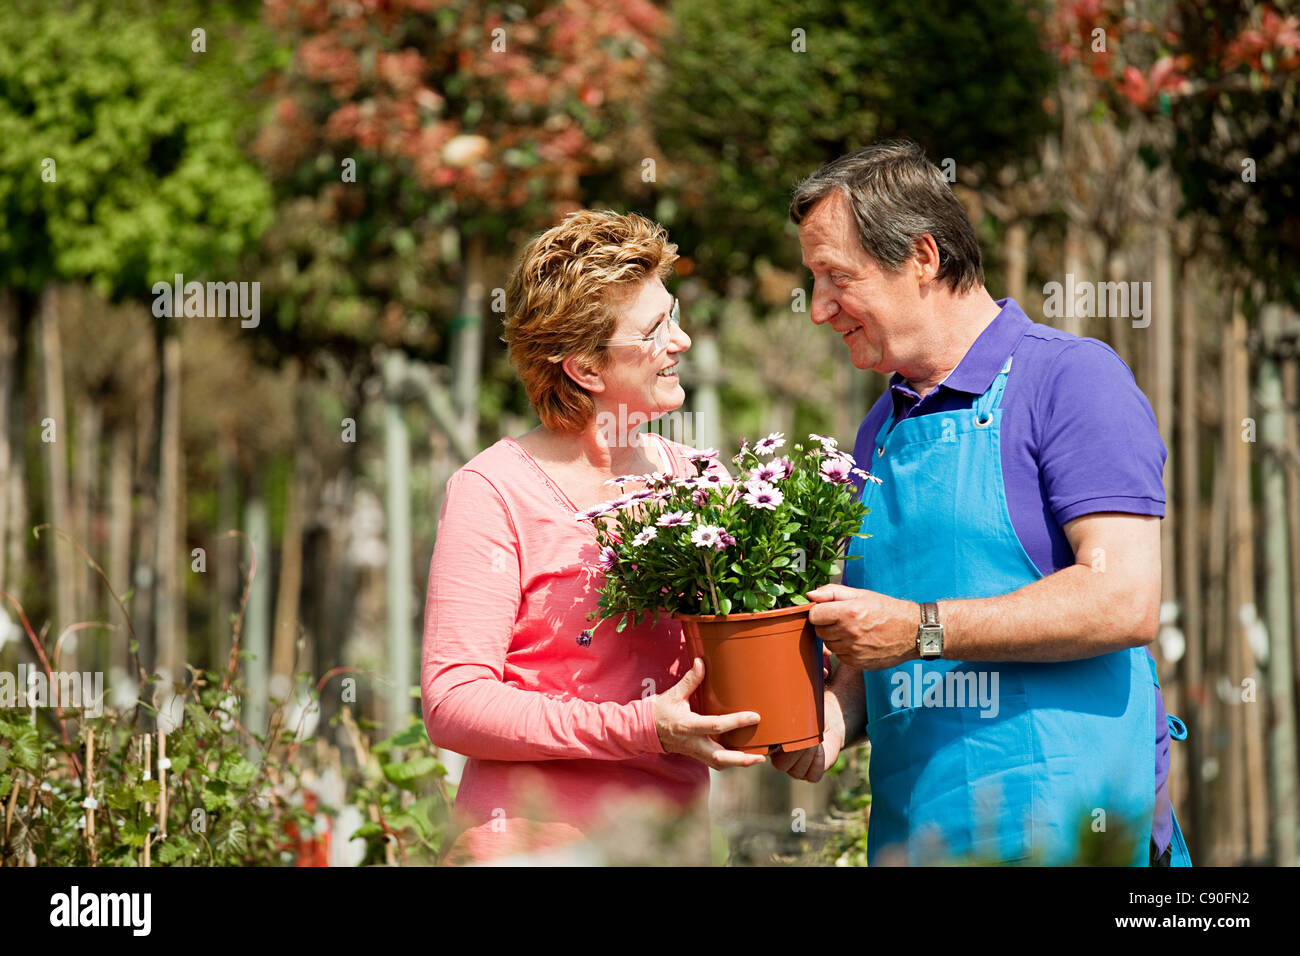 Woman buying plants at garden center Stock Photo